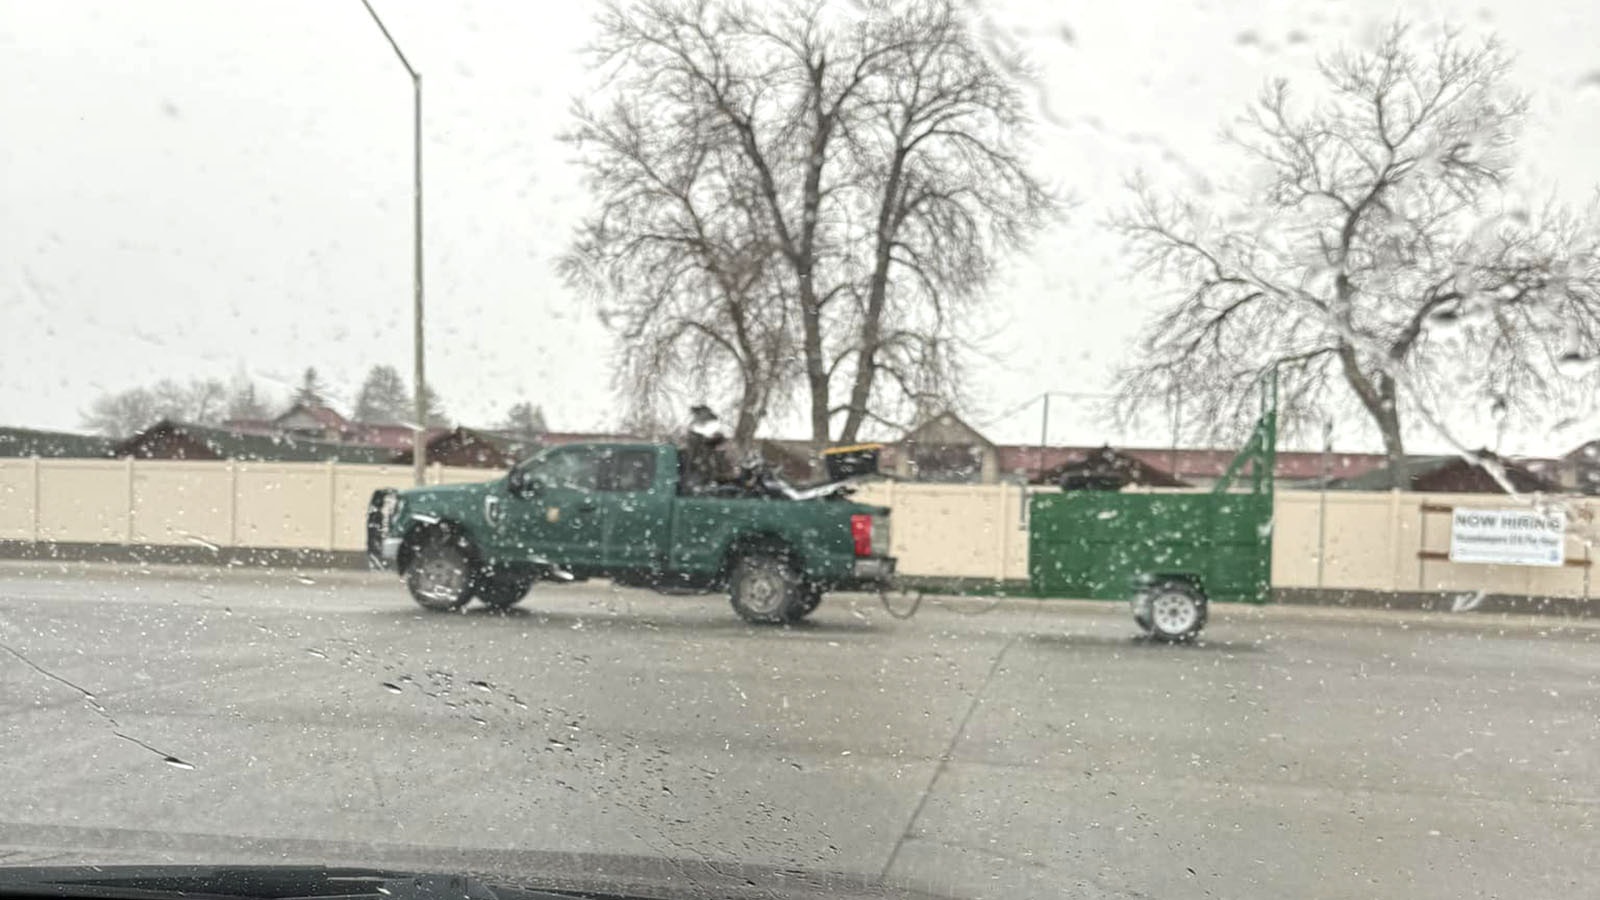 “Game and Fish on their way to trap a grizzly bear in Cody,” Matthew Thomas posted to Facebook on Wednesday as he got a photo of the green truck and trailer driving past the Holiday Inn Cody on 16th Street.